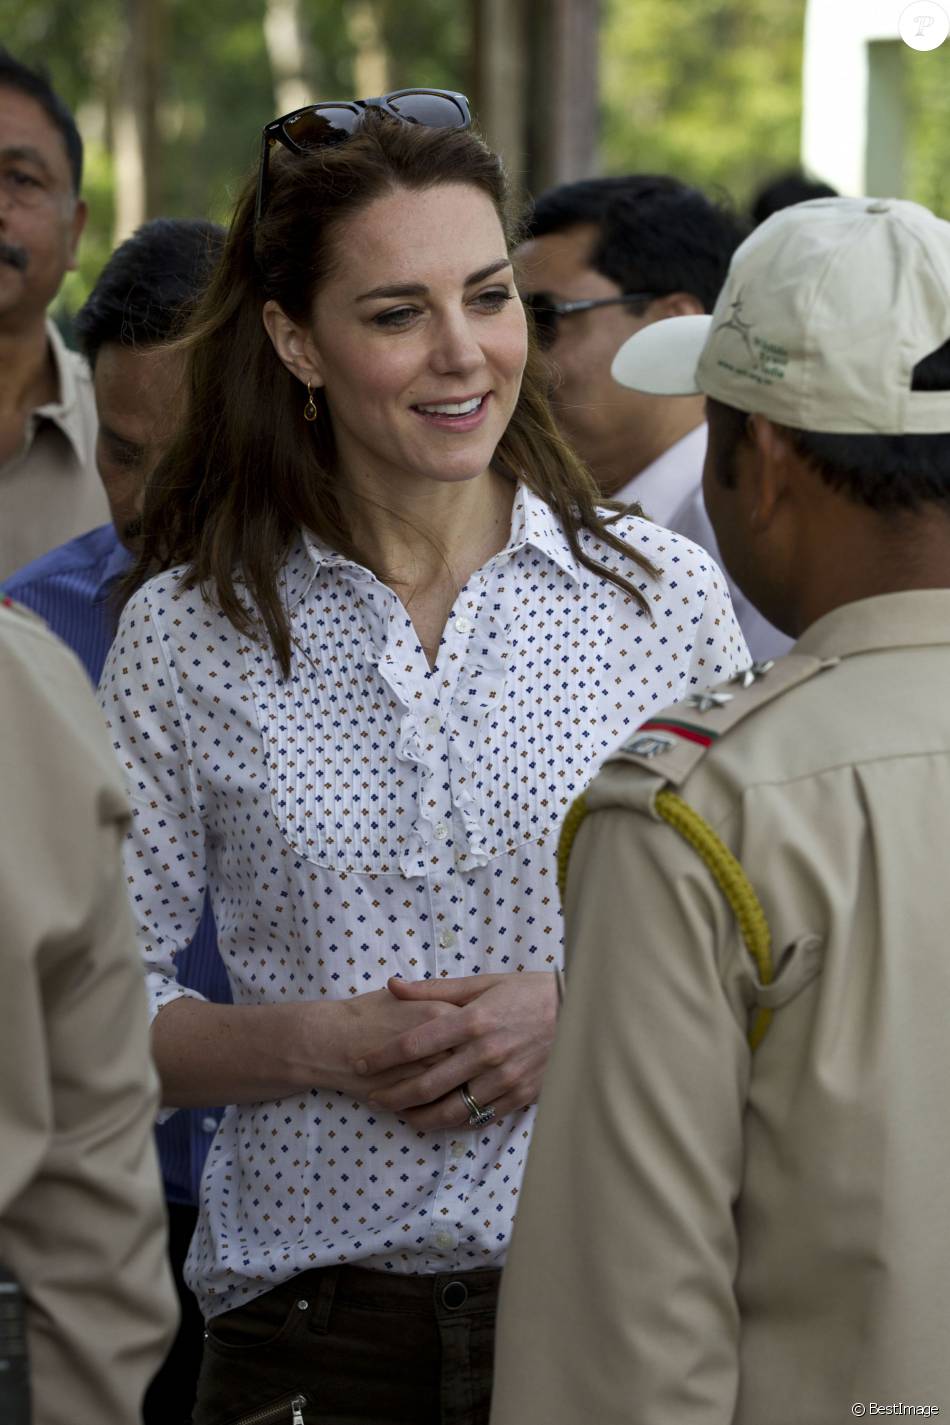 WILLAM y KATE: VISITA REAL A INDIA y BHUTÁN - Página 22 2205928-kate-middleton-et-le-prince-william-ont-950x0-3